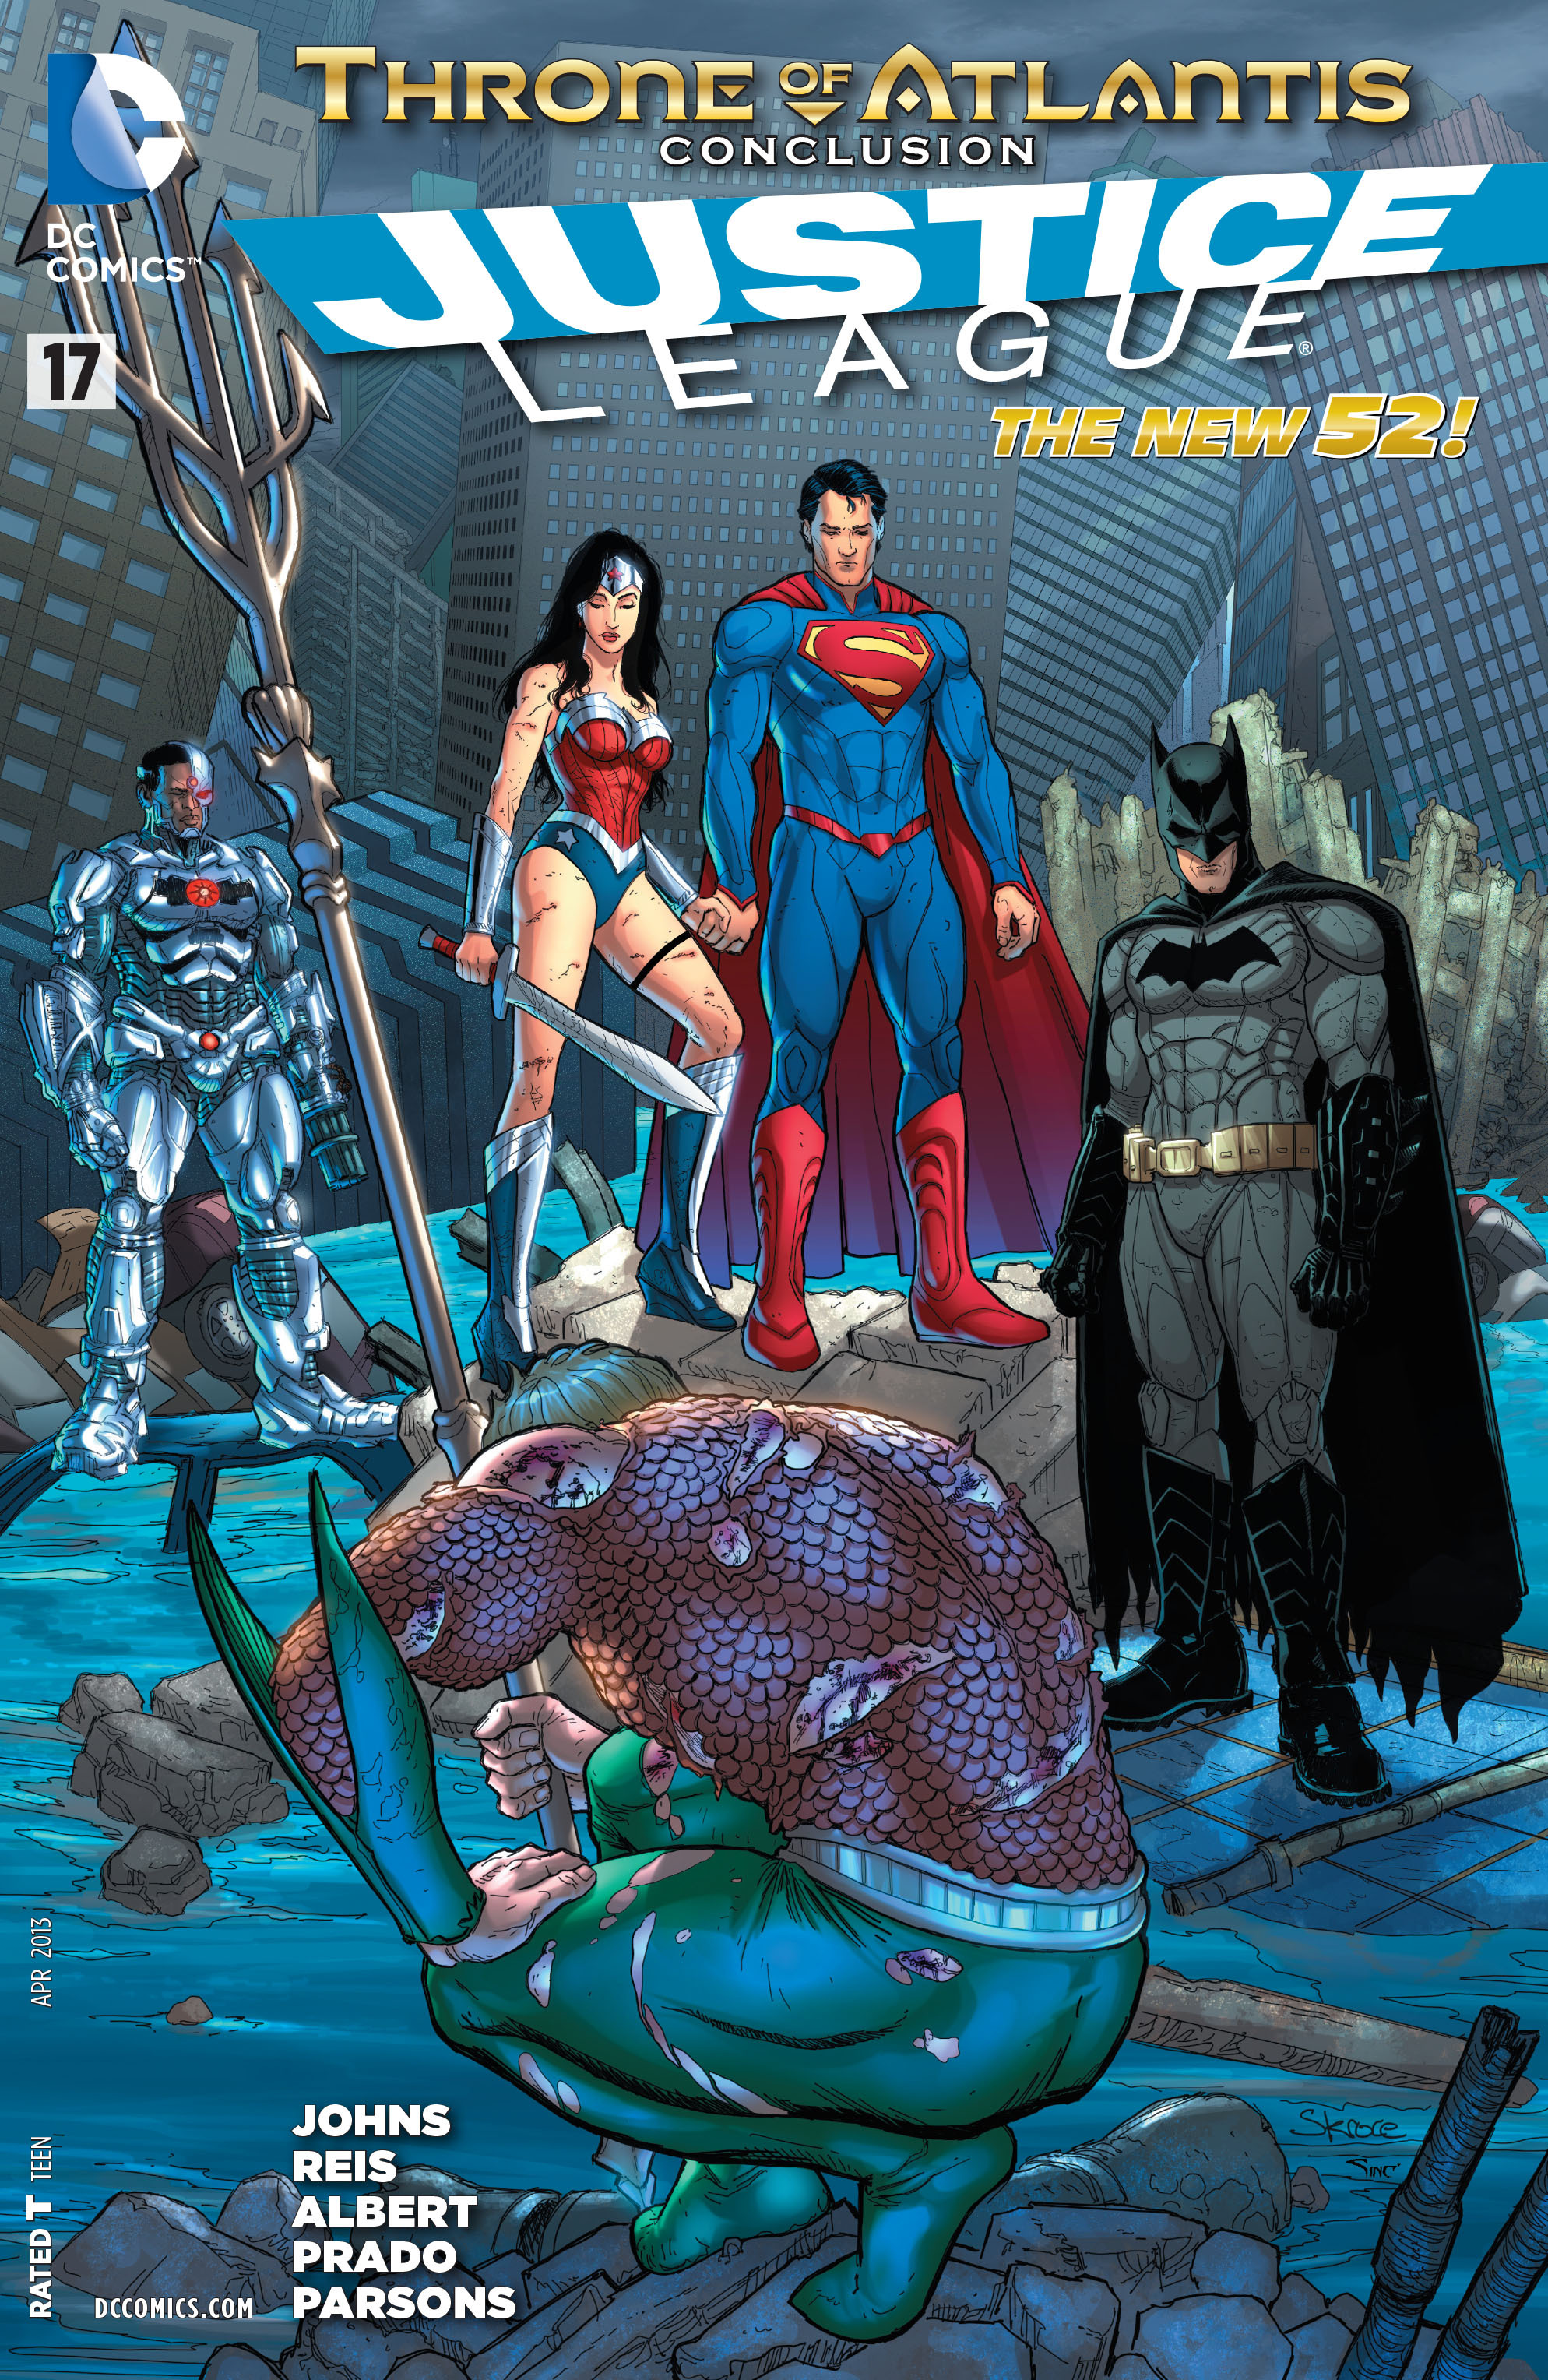 Read online Justice League (2011) comic -  Issue #17 - 2